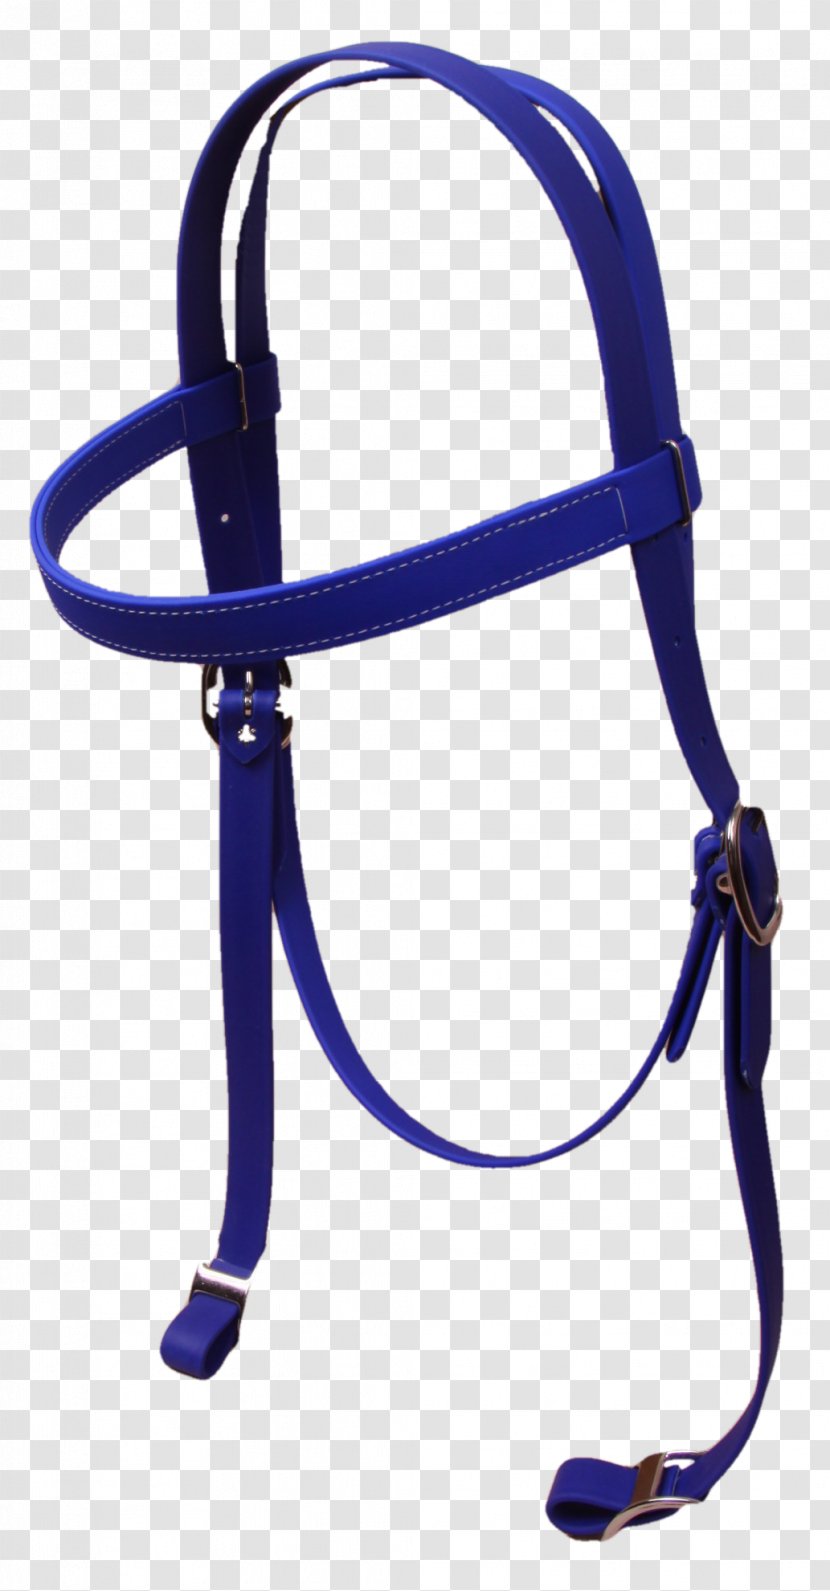 Climbing Harnesses Clothing Accessories Safety Harness Fashion - ROYAL HORSE Transparent PNG